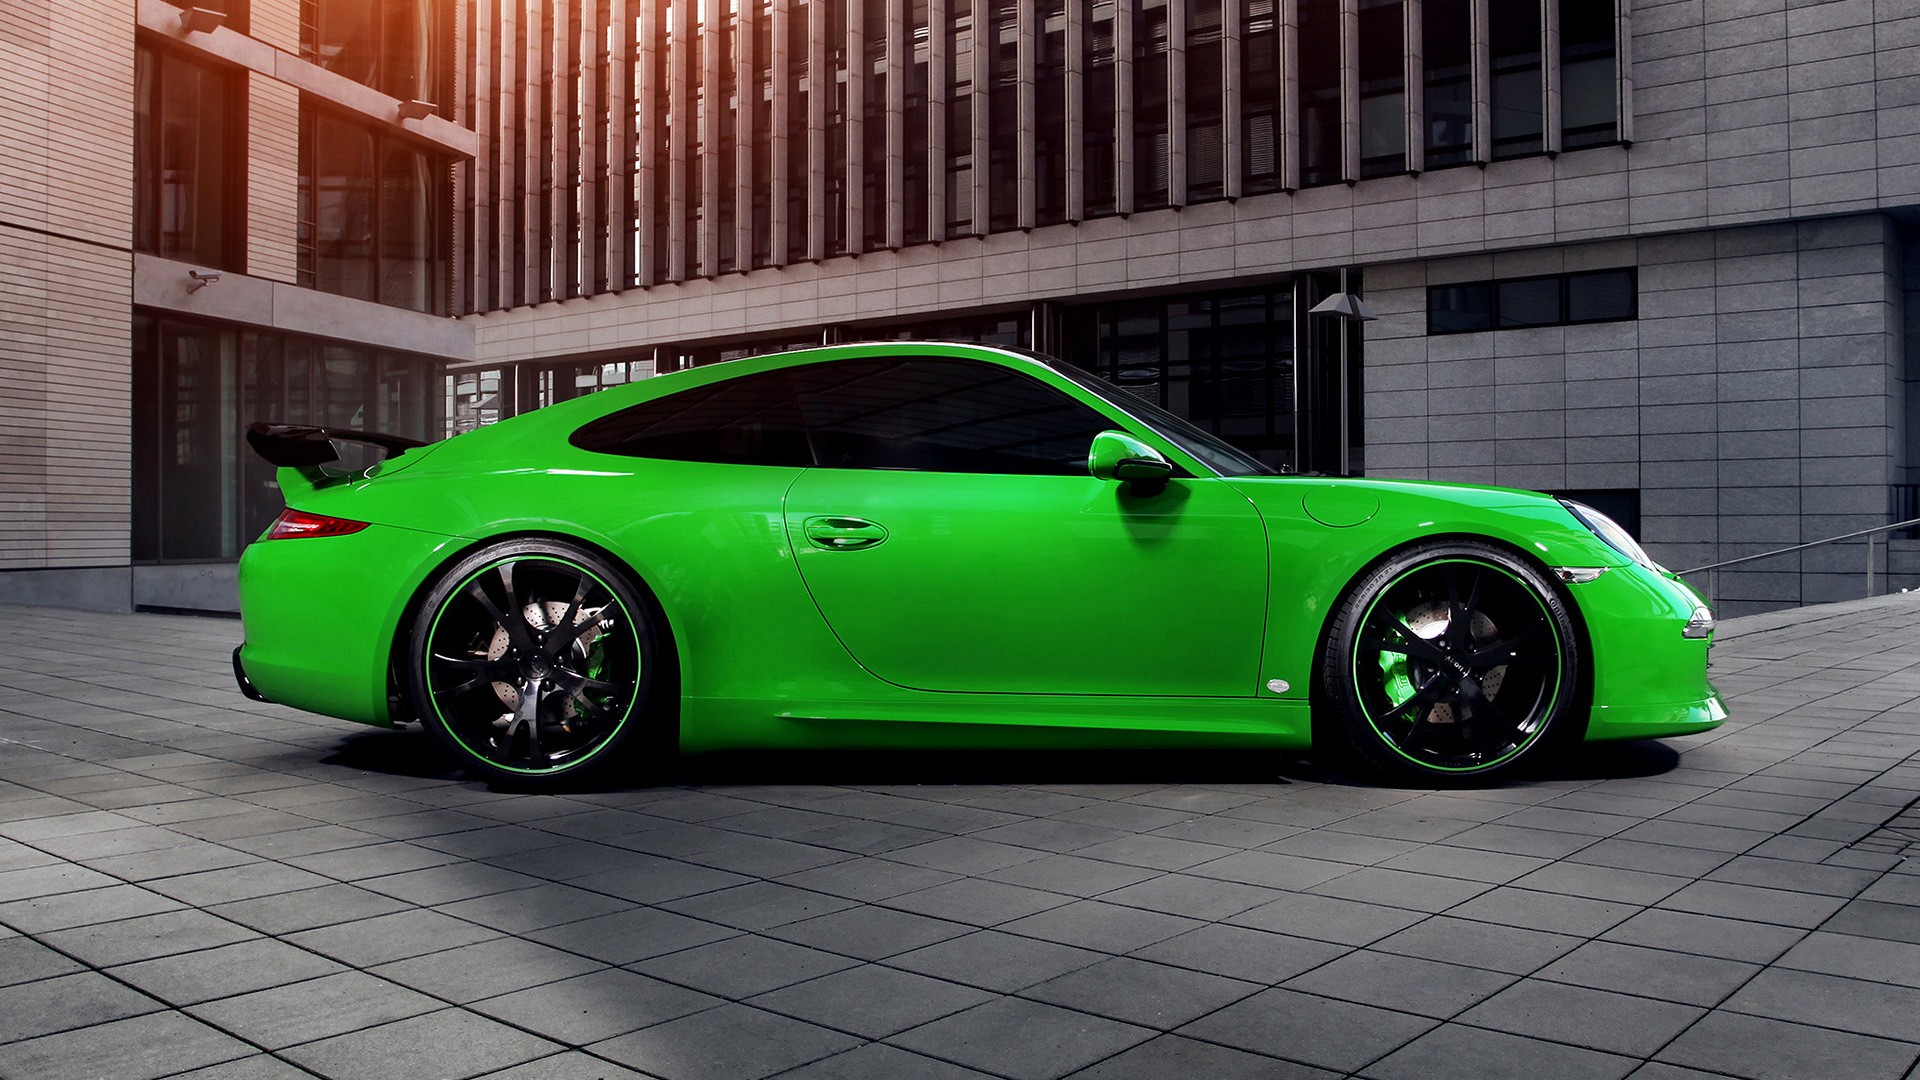 car, Porsche, Porsche Carrera 4S, Porsche 911, Porsche 911 Carrera 4S, Green Cars, Side View Wallpaper